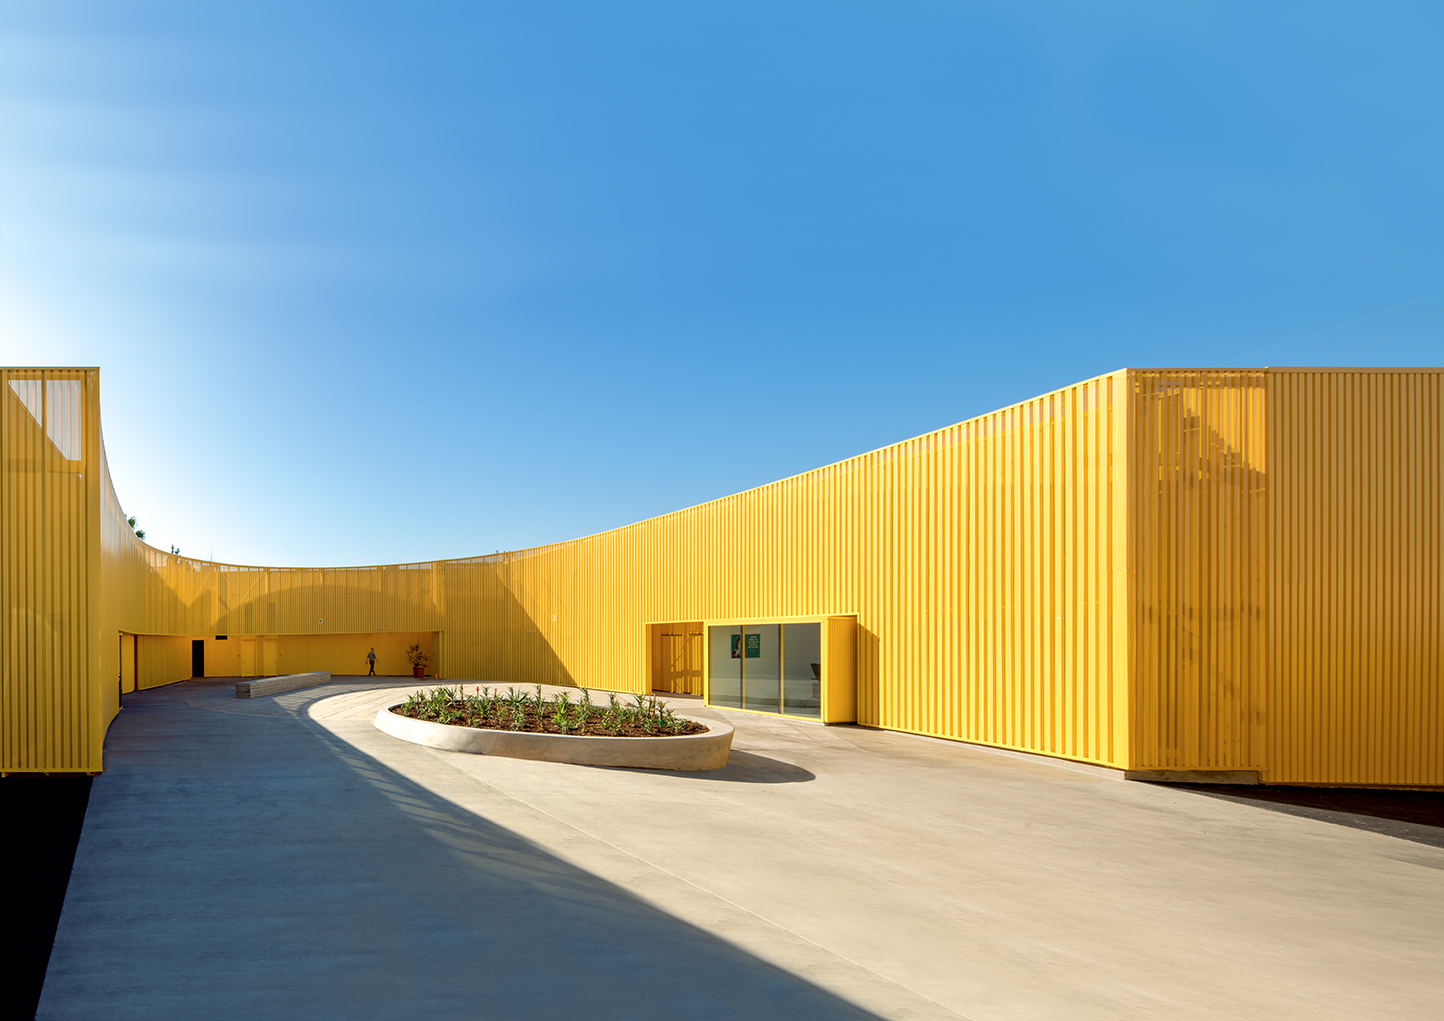 Animo South Los Angeles High School by Brooks + Scarpa Architects, Los Angeles, California